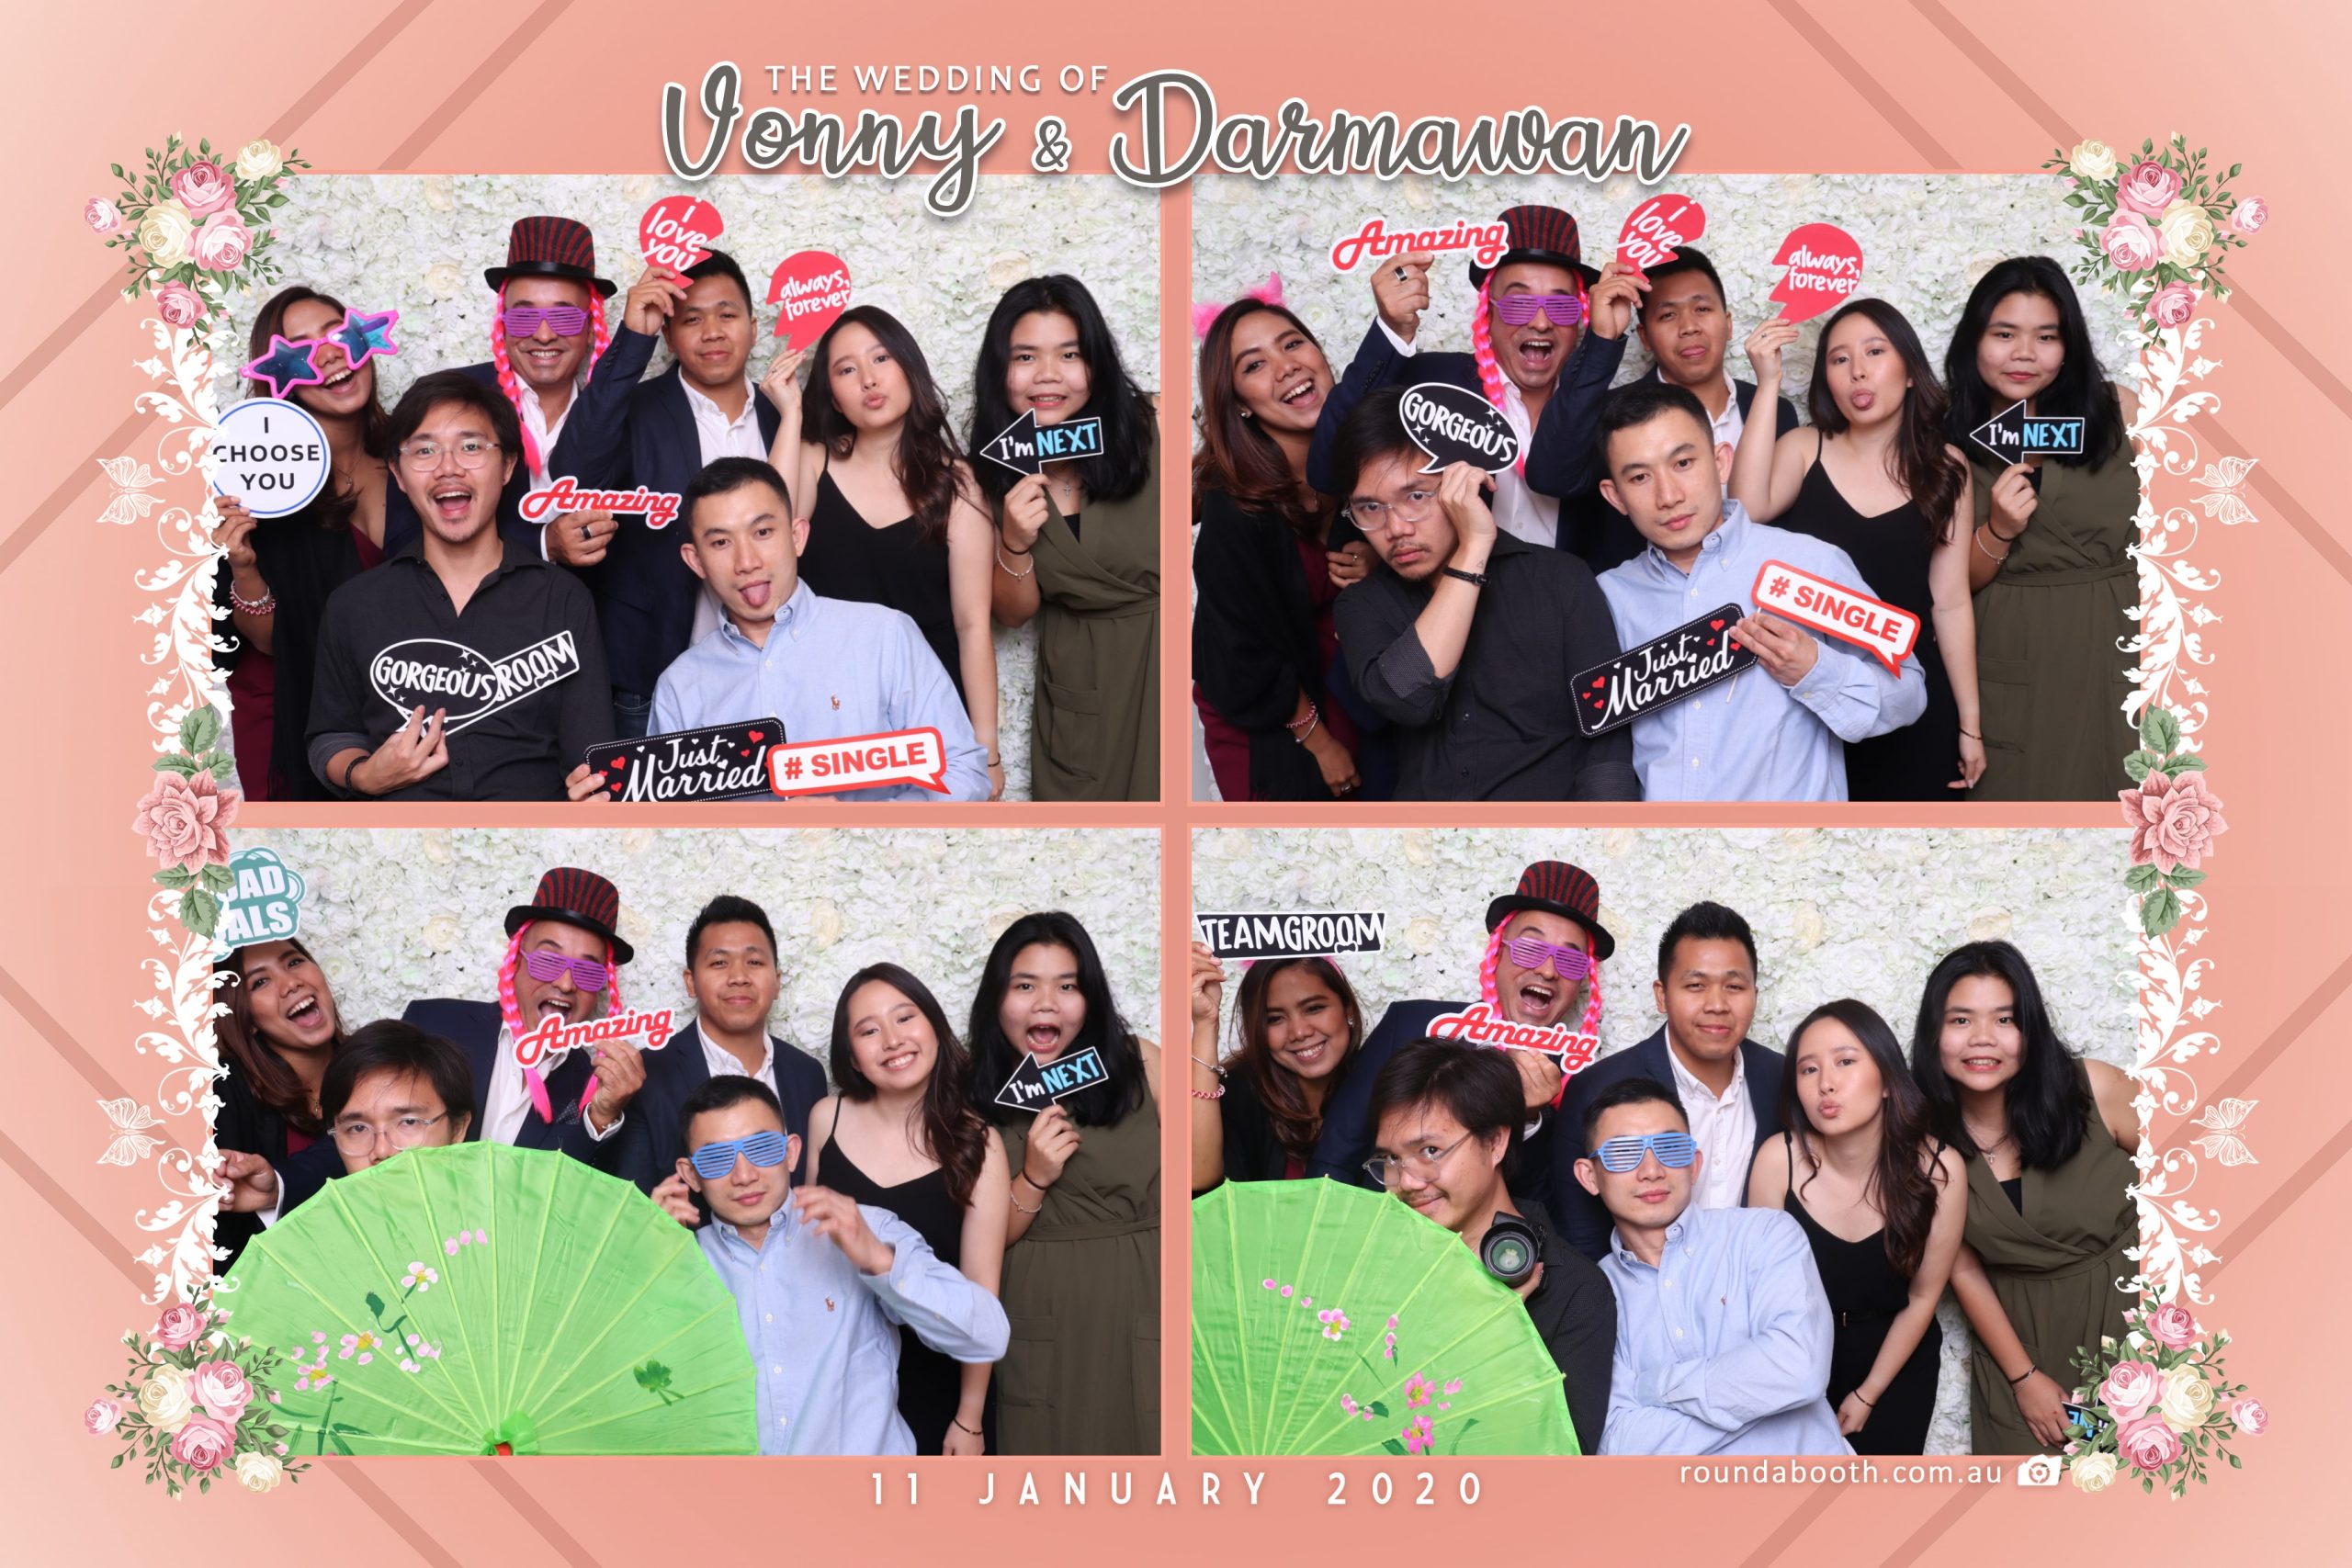 Wedding Roundabooth photo booth guests at Cabramatta NSW